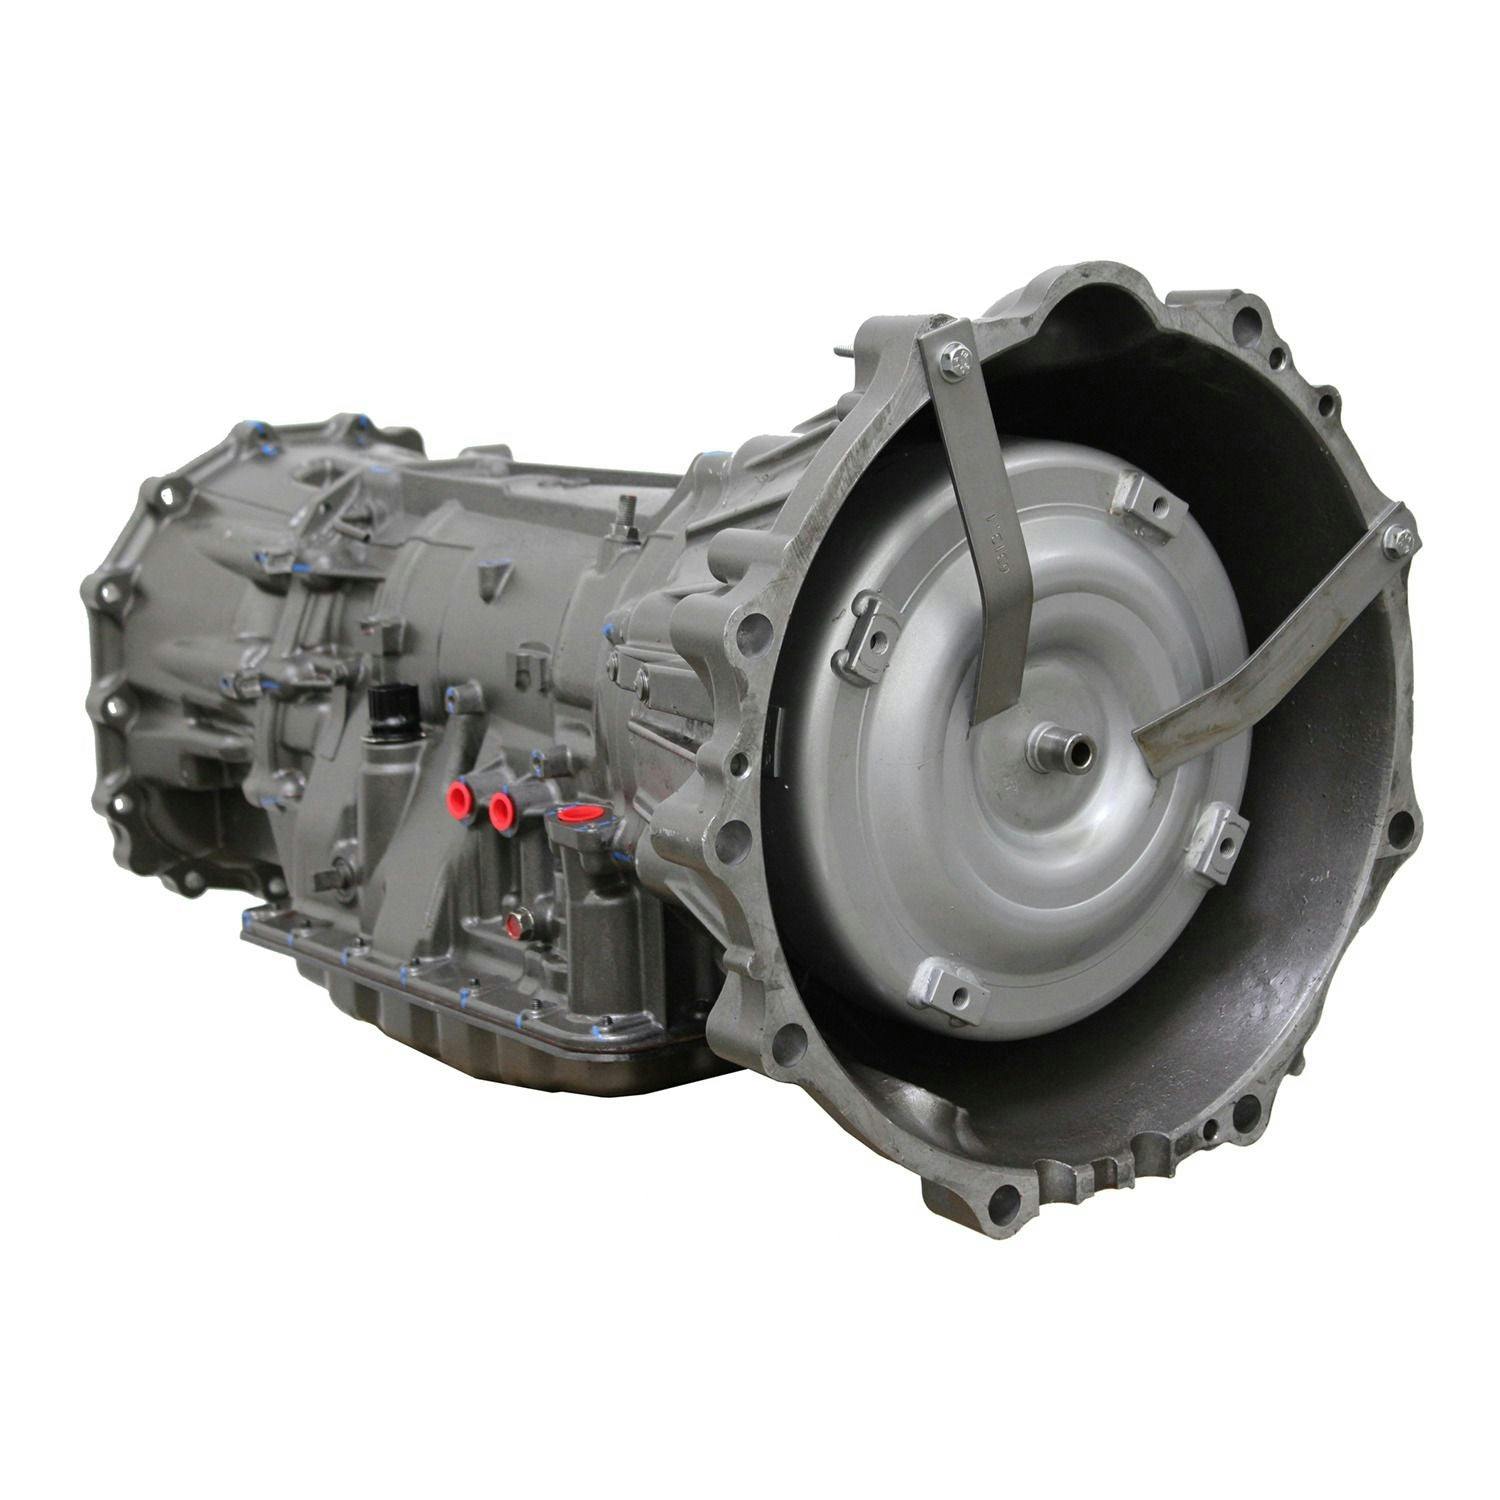 Automatic Transmission for 2005-2008 Nissan Armada/Infiniti QX56 4WD with 5.6L V8 Engine